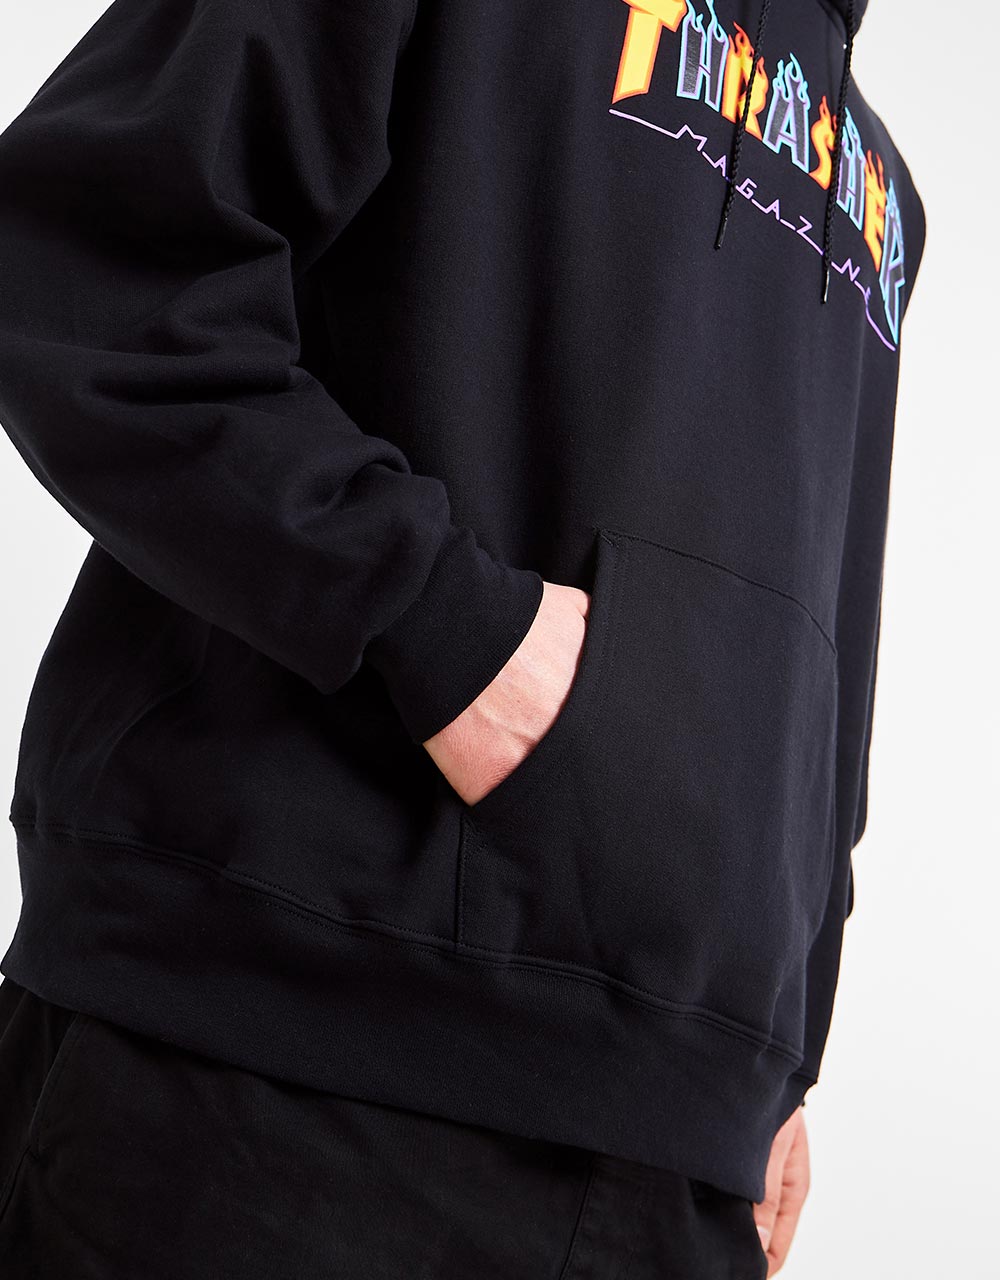 Thrasher Double Flame Pullover Hoodie - Black